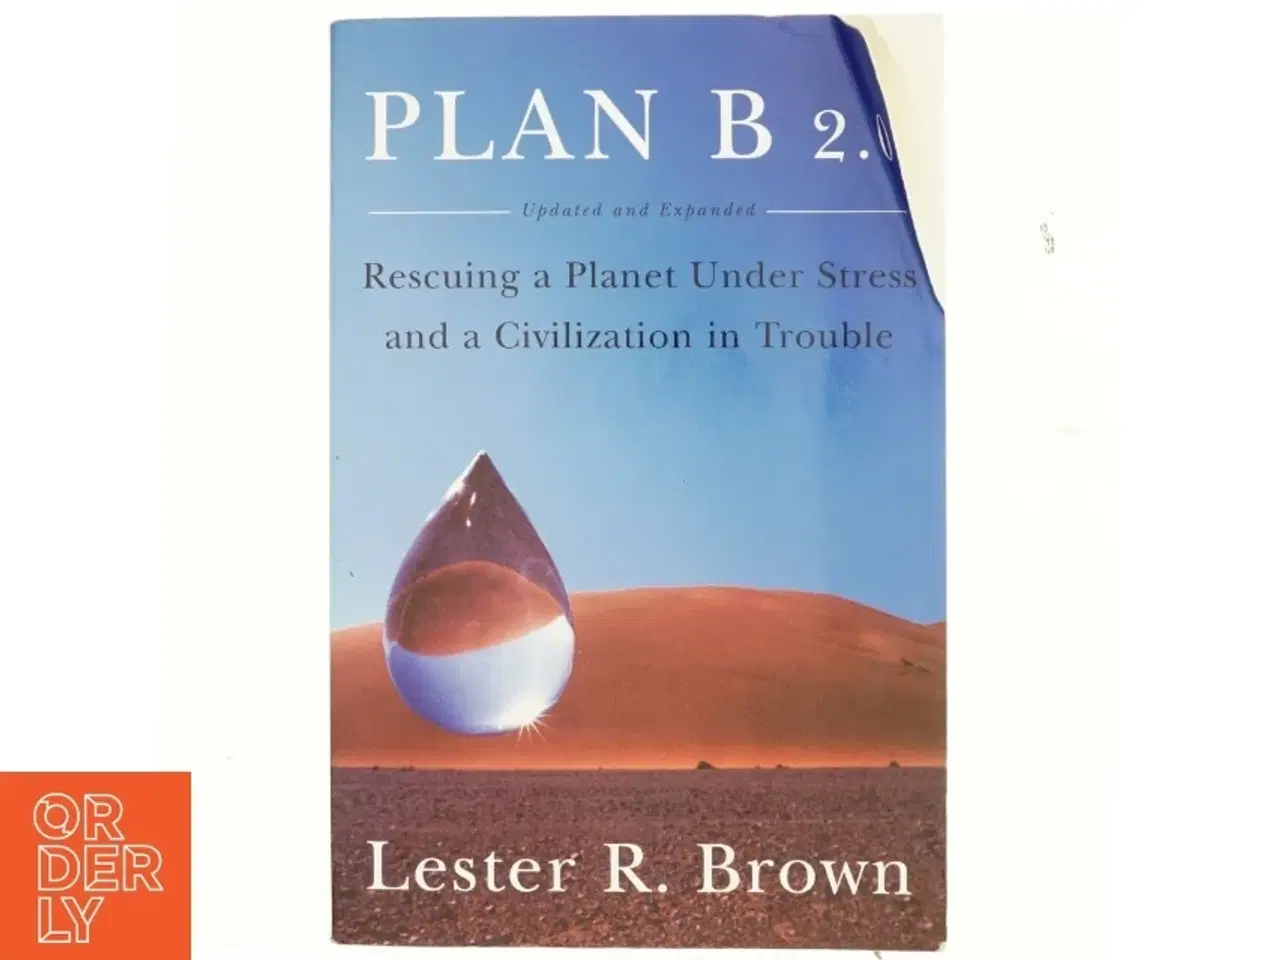 Billede 1 - Plan B 2.0 - Rescuing a Planet Under Stress and a Civilization in Trouble af Lester R. Brown